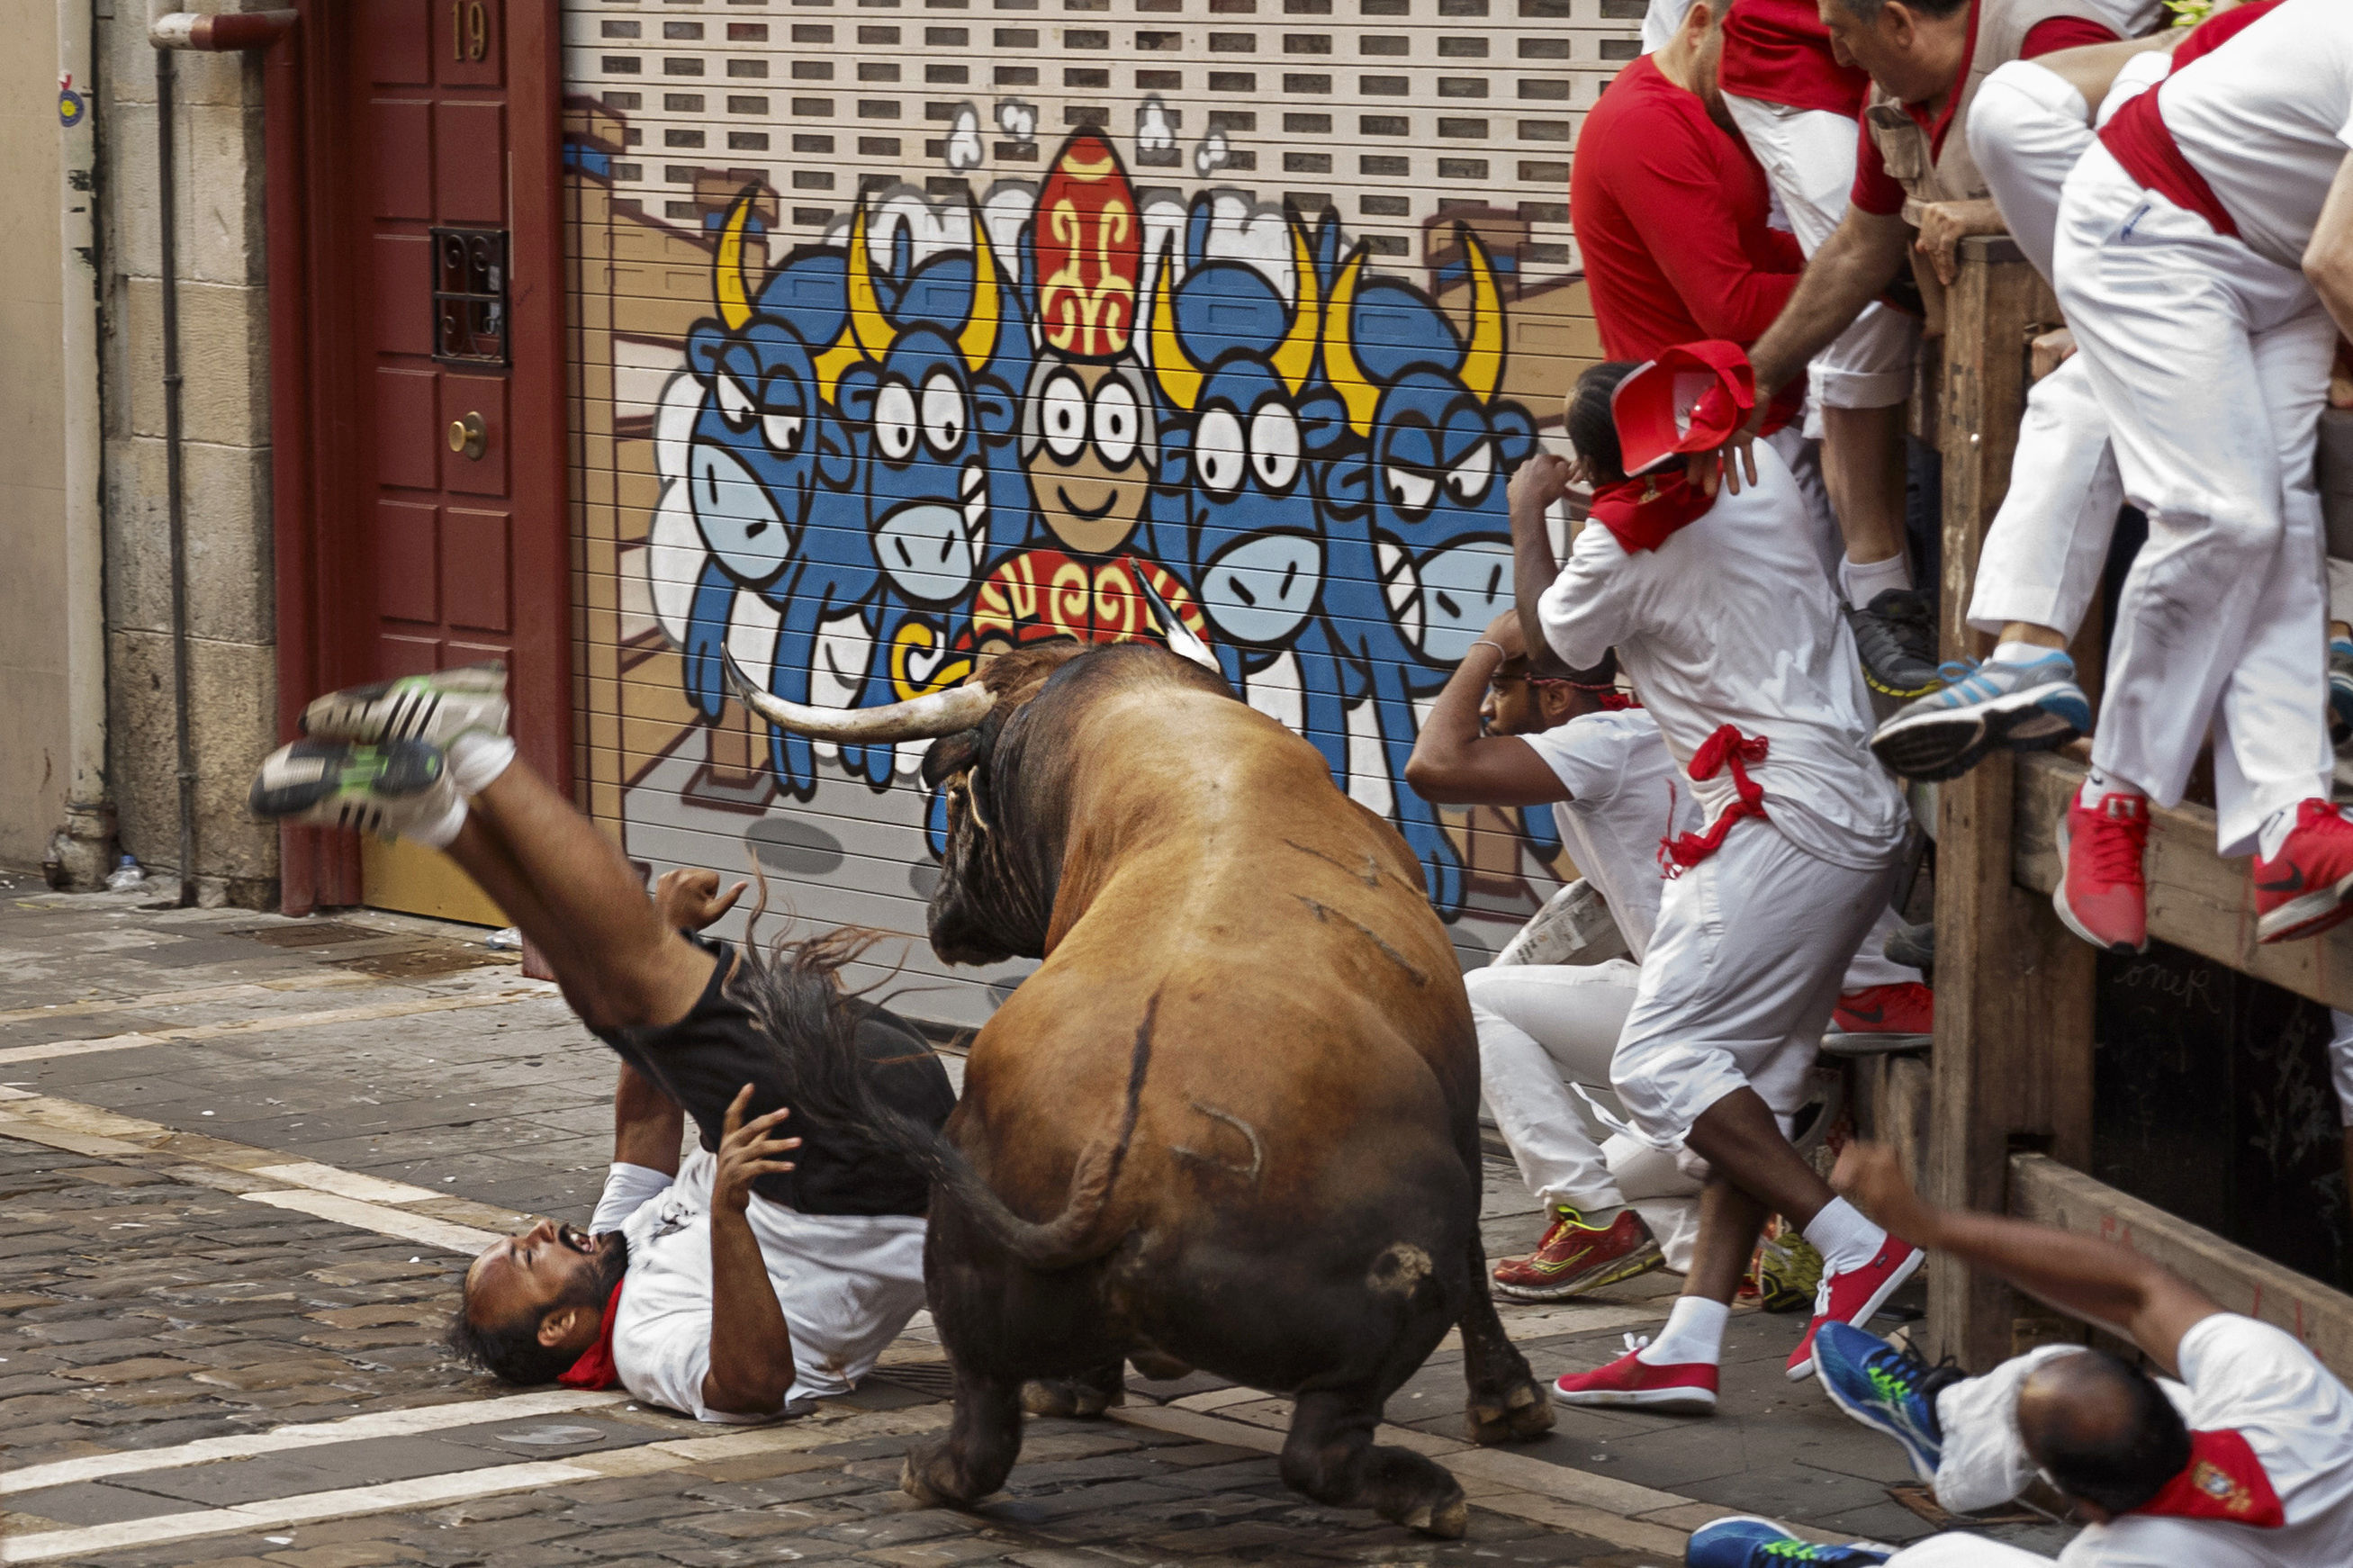 A reveller is gored by a Cebada Gago's ranch fighting bull during the running of the bulls in Pamplona, Spain (AP Photo/Daniel Ochoa de Olza)